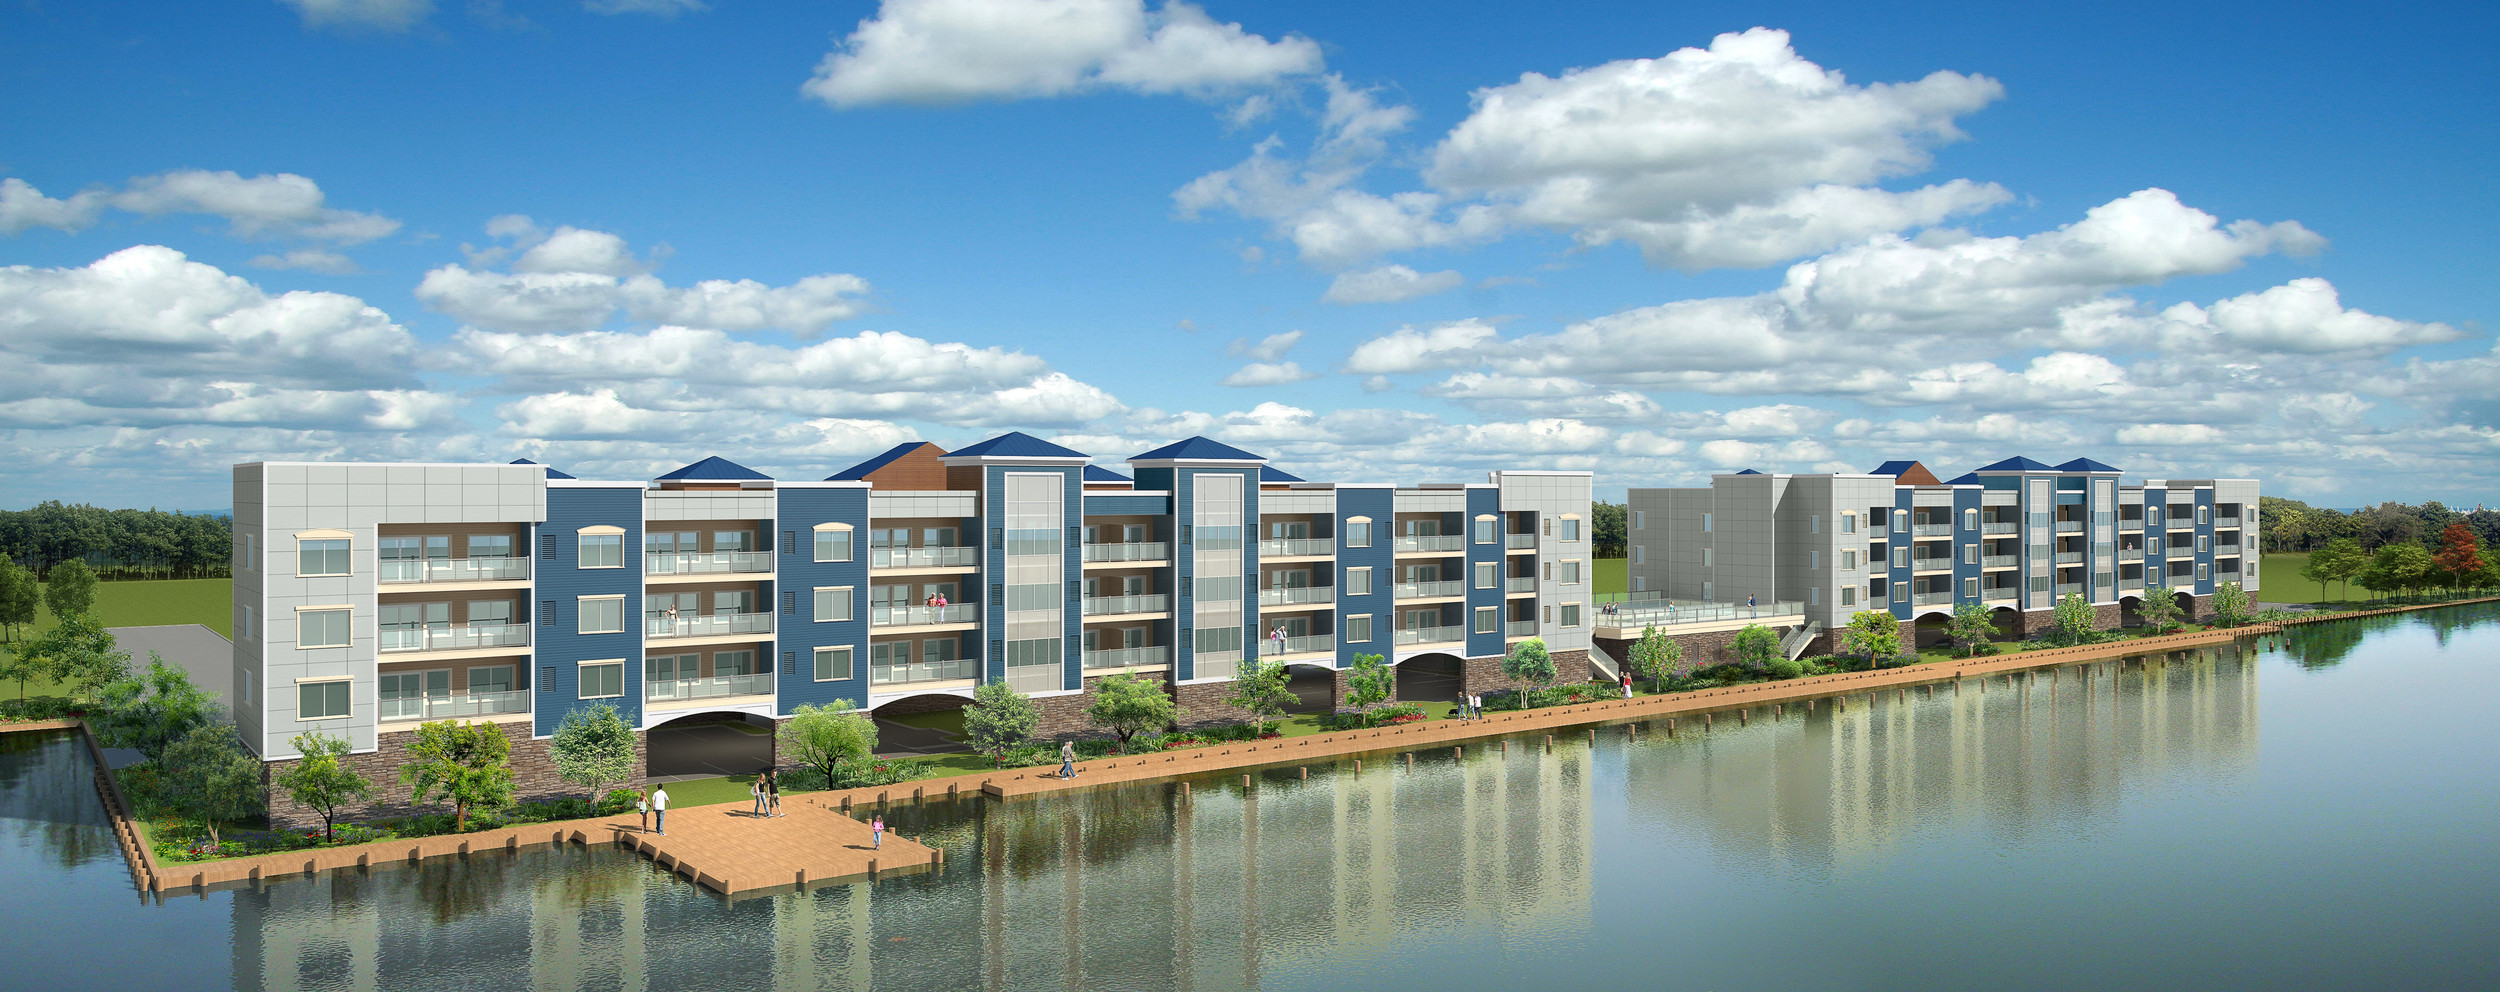 An artists rendering of the new apartment buildings that will be built on the site of Paddy McGee’s in Island Park.